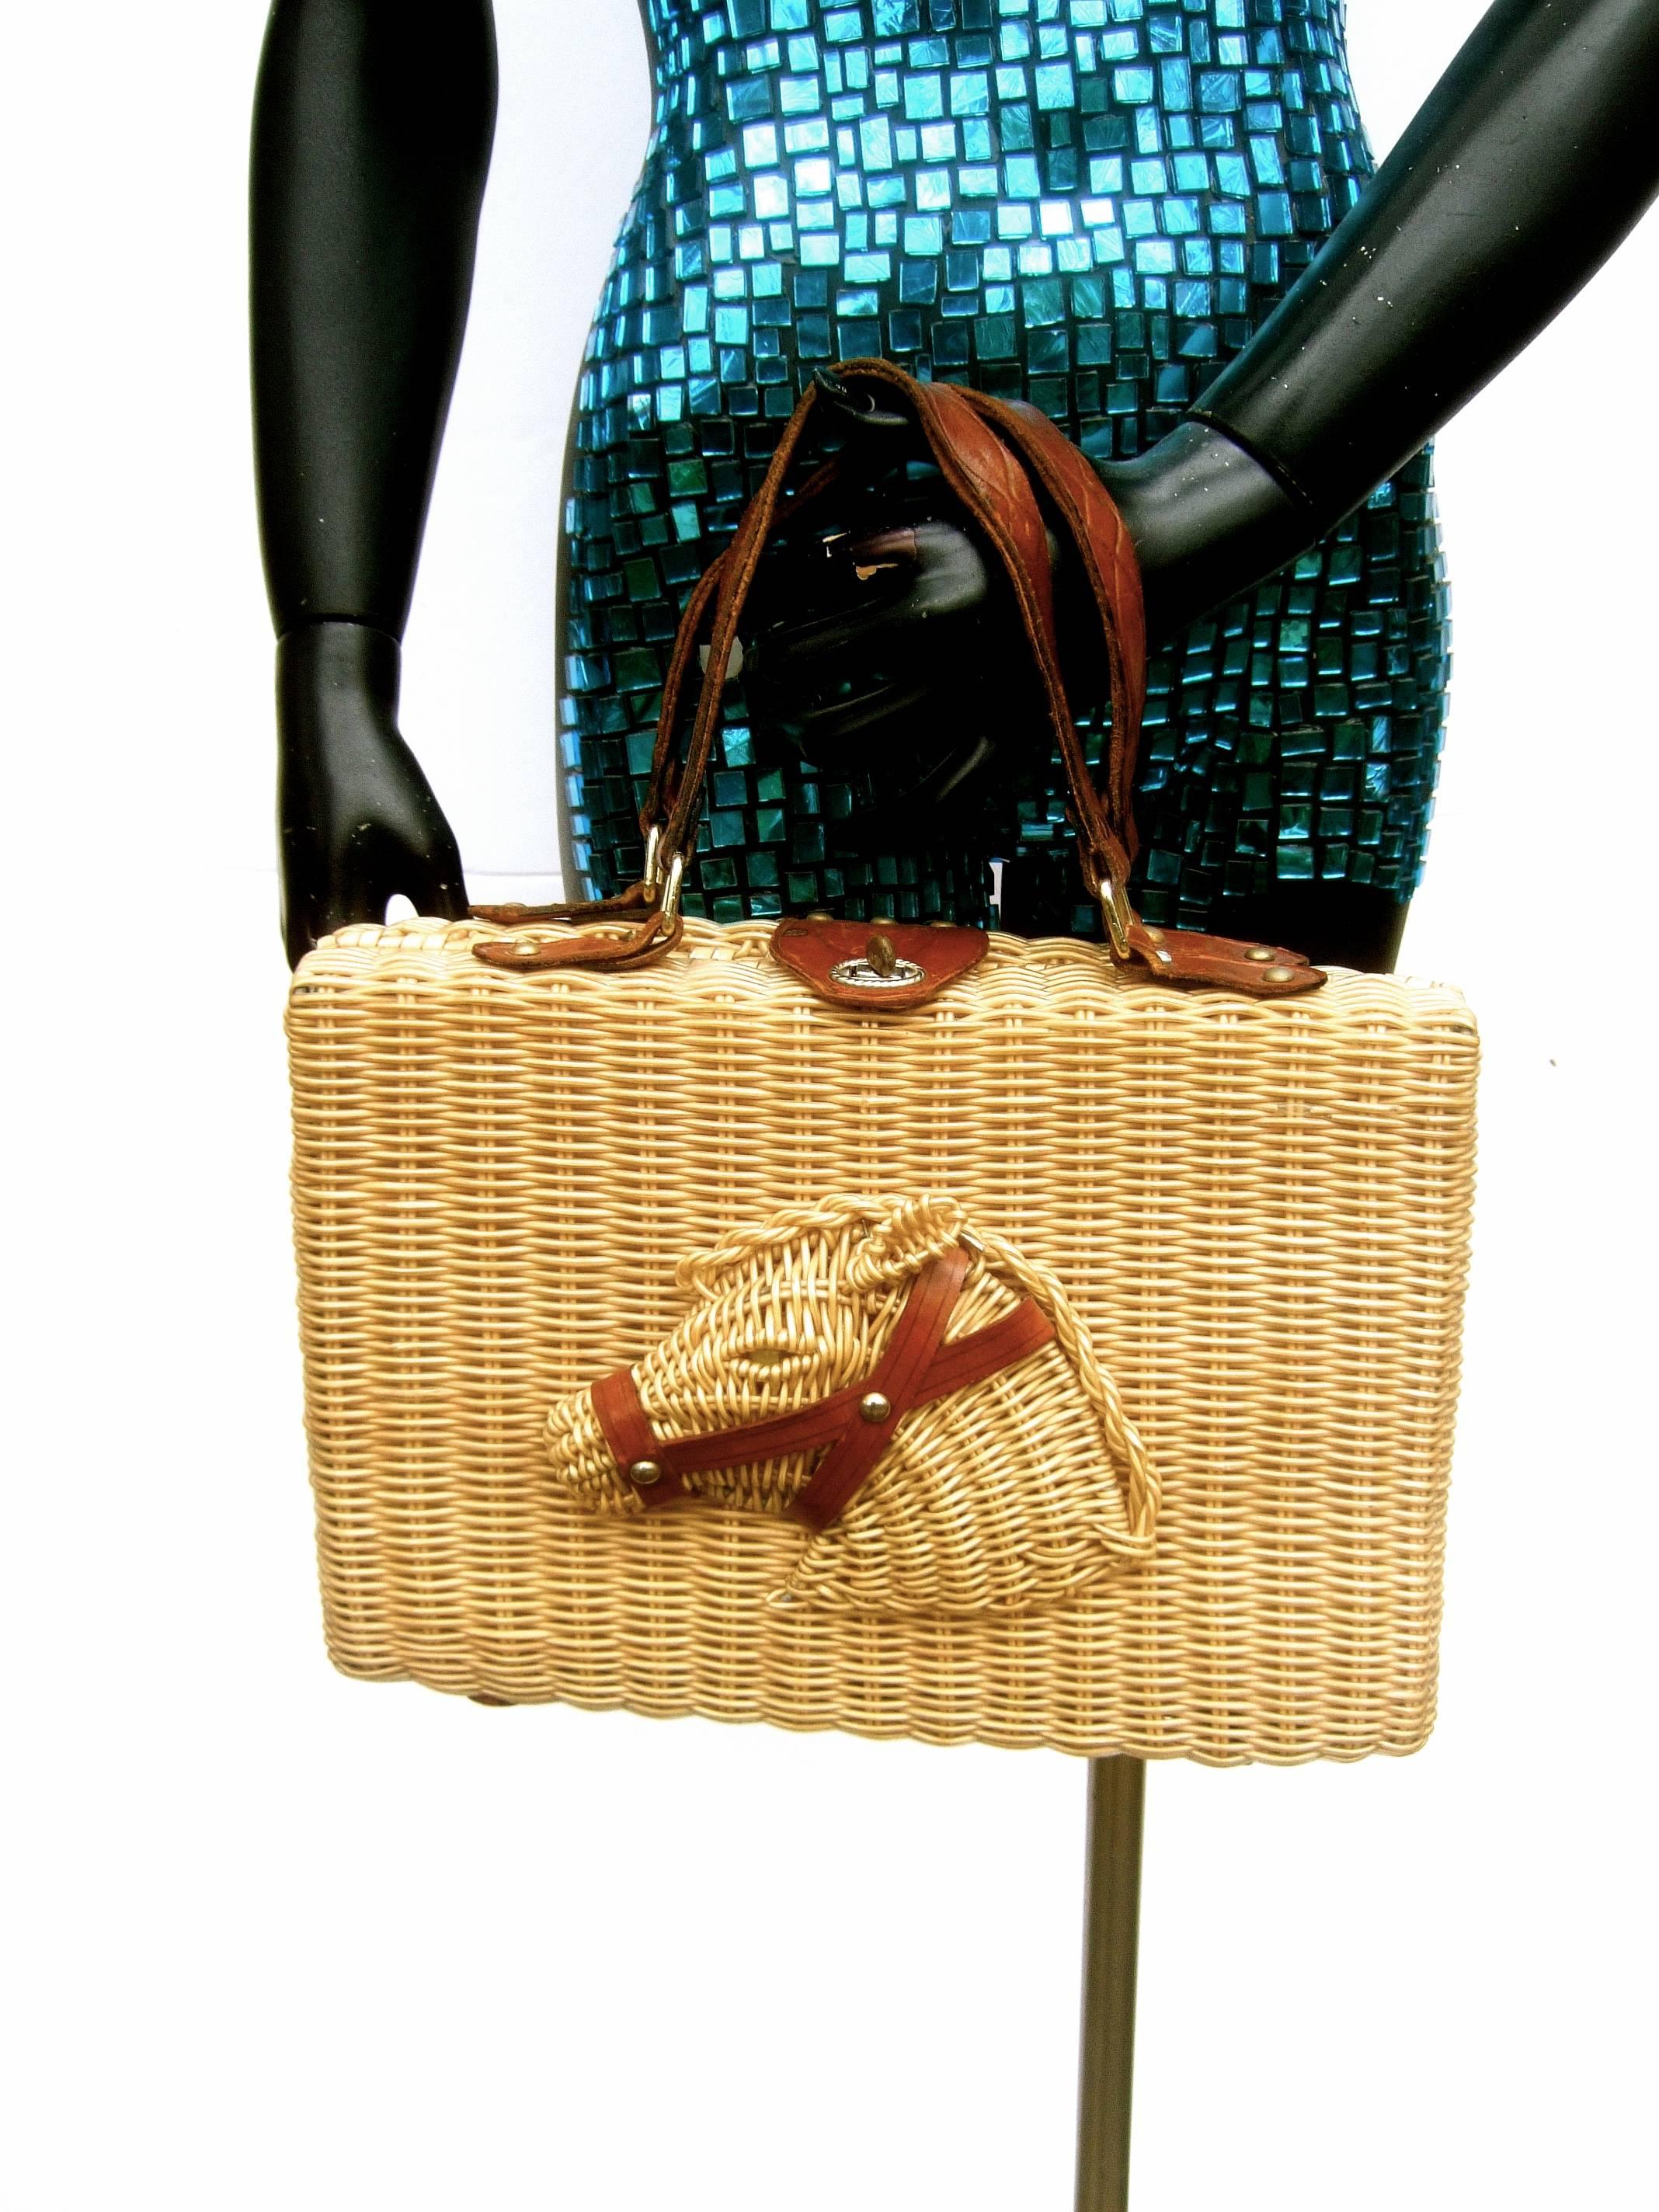 Unique wicker horse head leather trim handbag ca 1960s 
The vintage wicker handbag is designed with a 
three dimensional horse head on the front panel 

The horse head is designed with brown leather 
bridal straps and a glass marble eye

Carried